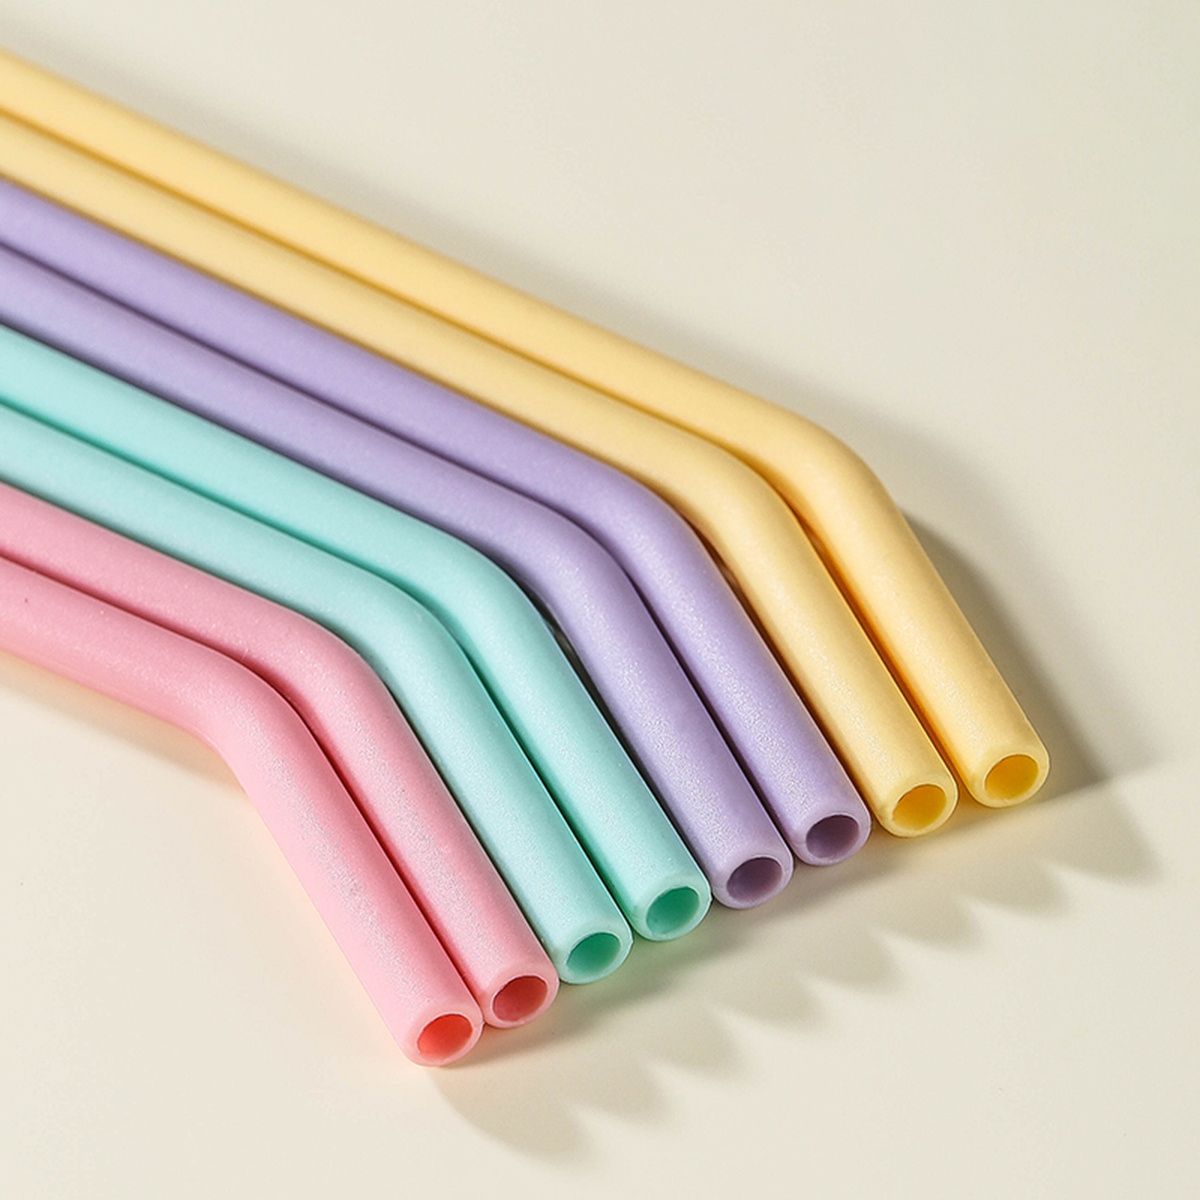 Silicone Straw Tips for Stainless Steel 100pcs Multicolored Reusable Silicone Tip for Metal Rubber Straws Covers with Individually Wrapped | Food